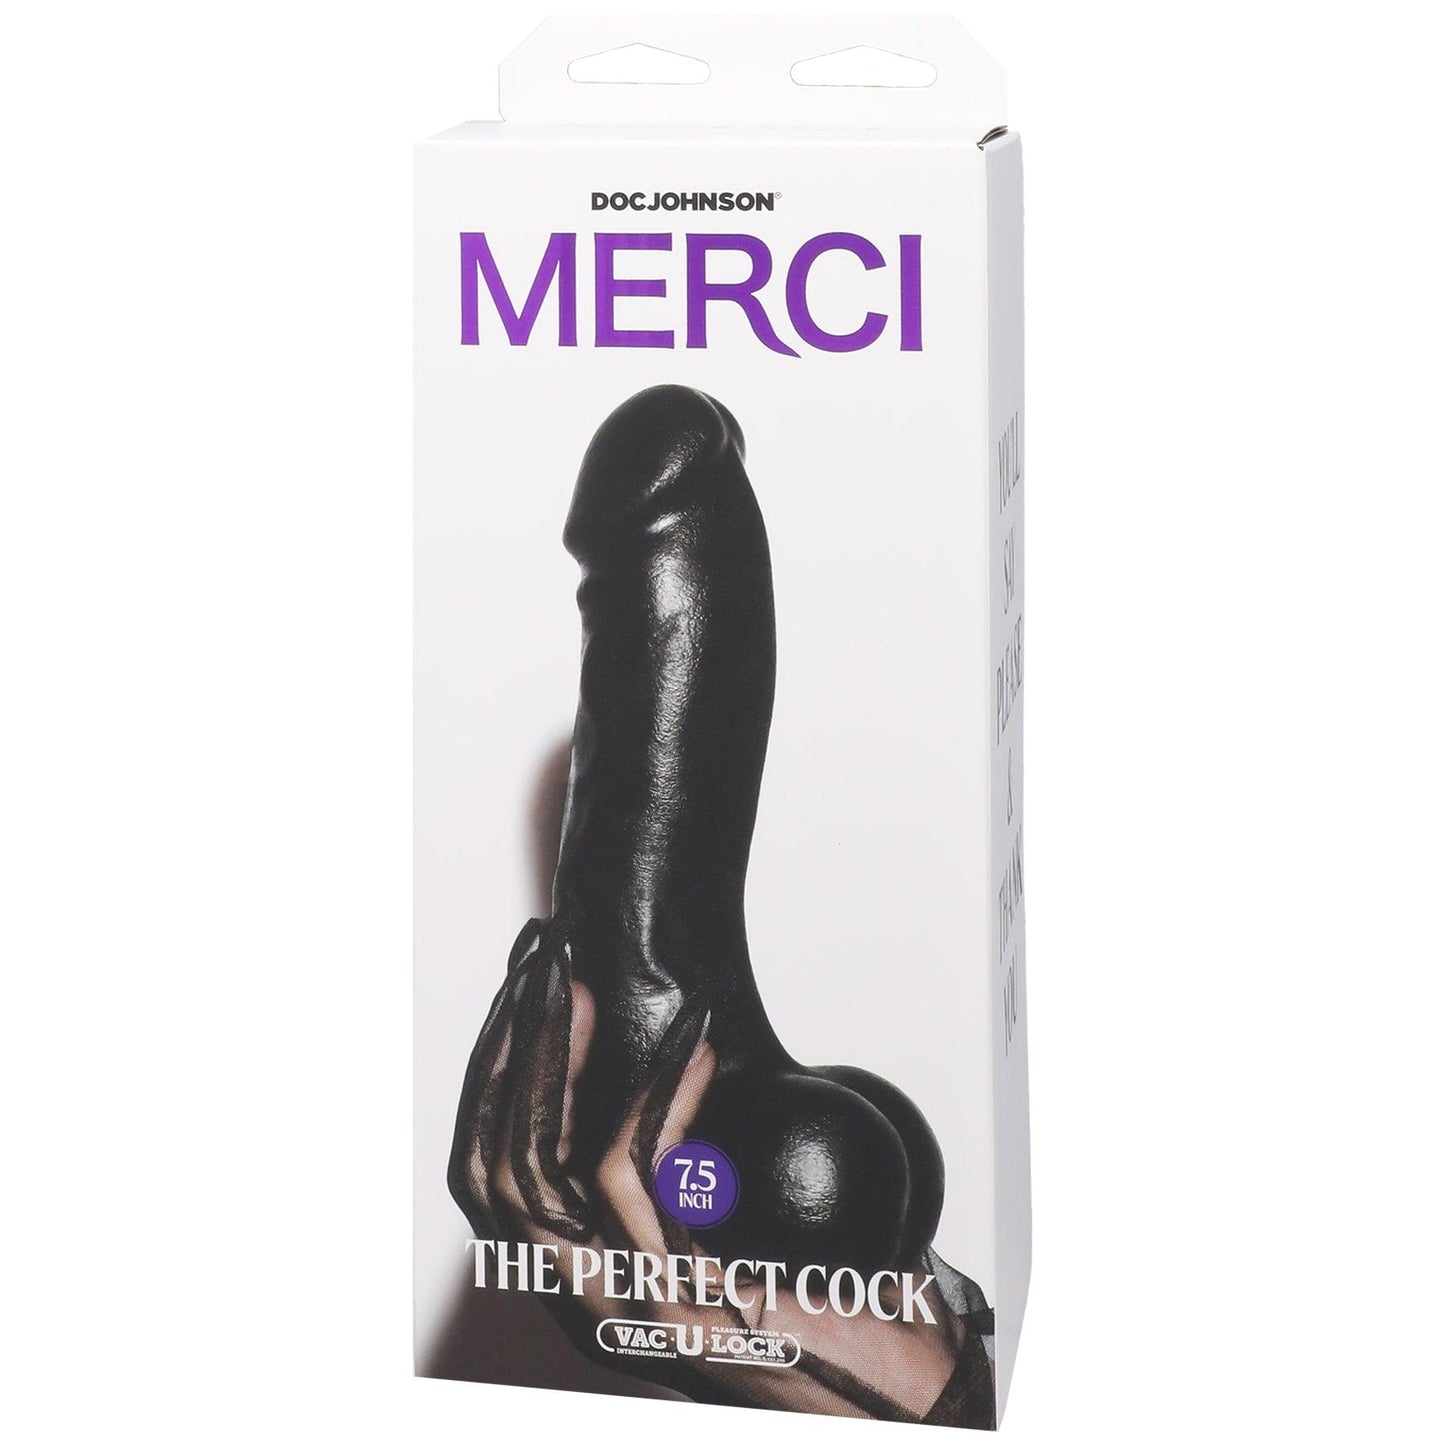 Merci - the Perfect Cock 7.5 Inch - With Removable Vac-U-Lock Suction Cup - Black - My Sex Toy Hub